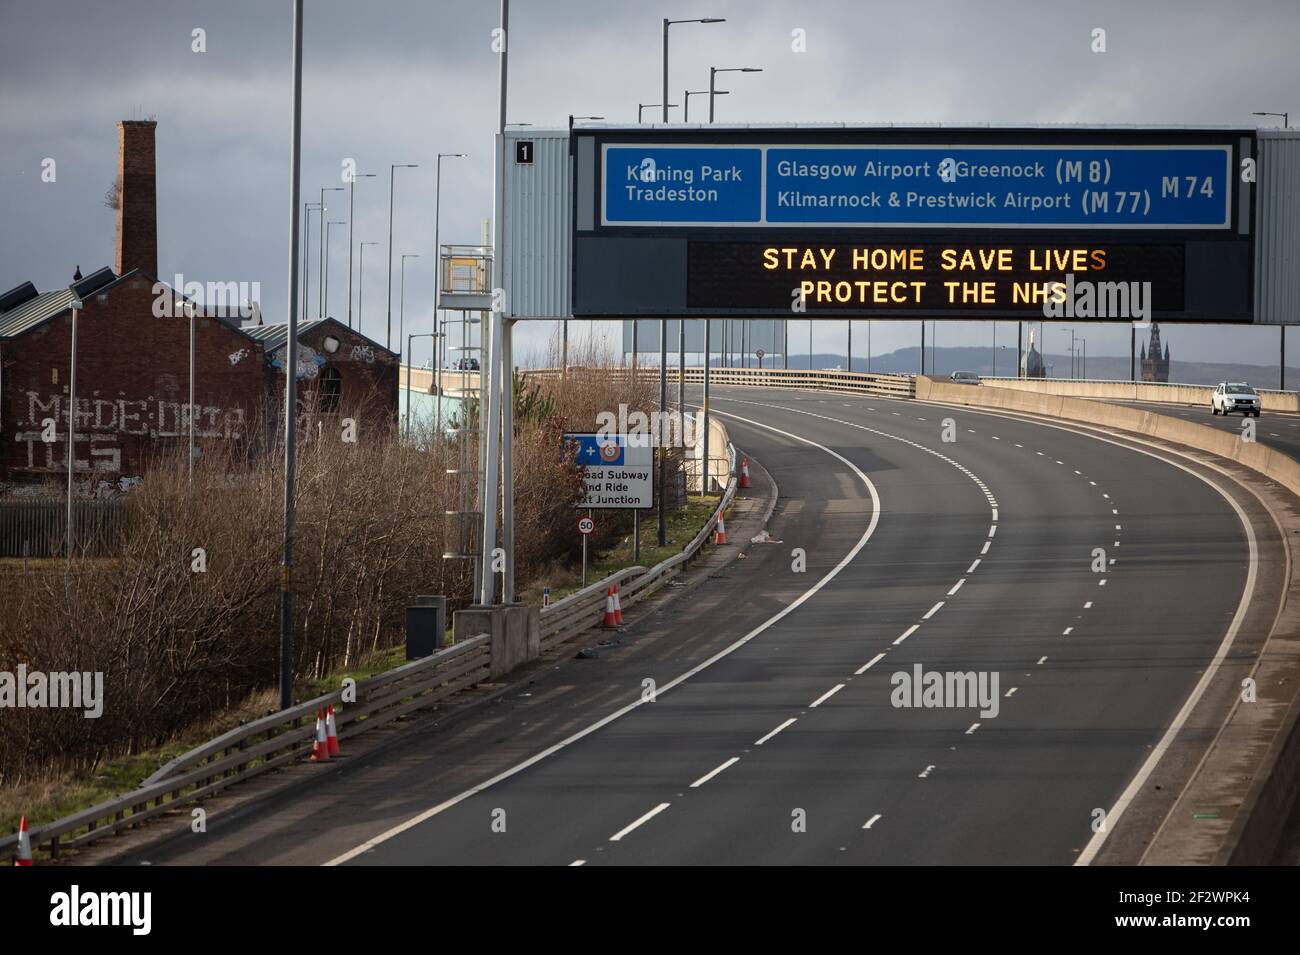 Glasgow, UK, on 13 March 2021. ÔStay Home, Save Lives, Protect the NHSÕ motorway messaging, during the current Covid-19 CoronaVirus health pandemic lockdown. Photo credit: Jeremy Sutton-Hibbert/Alamy Live News. Stock Photo